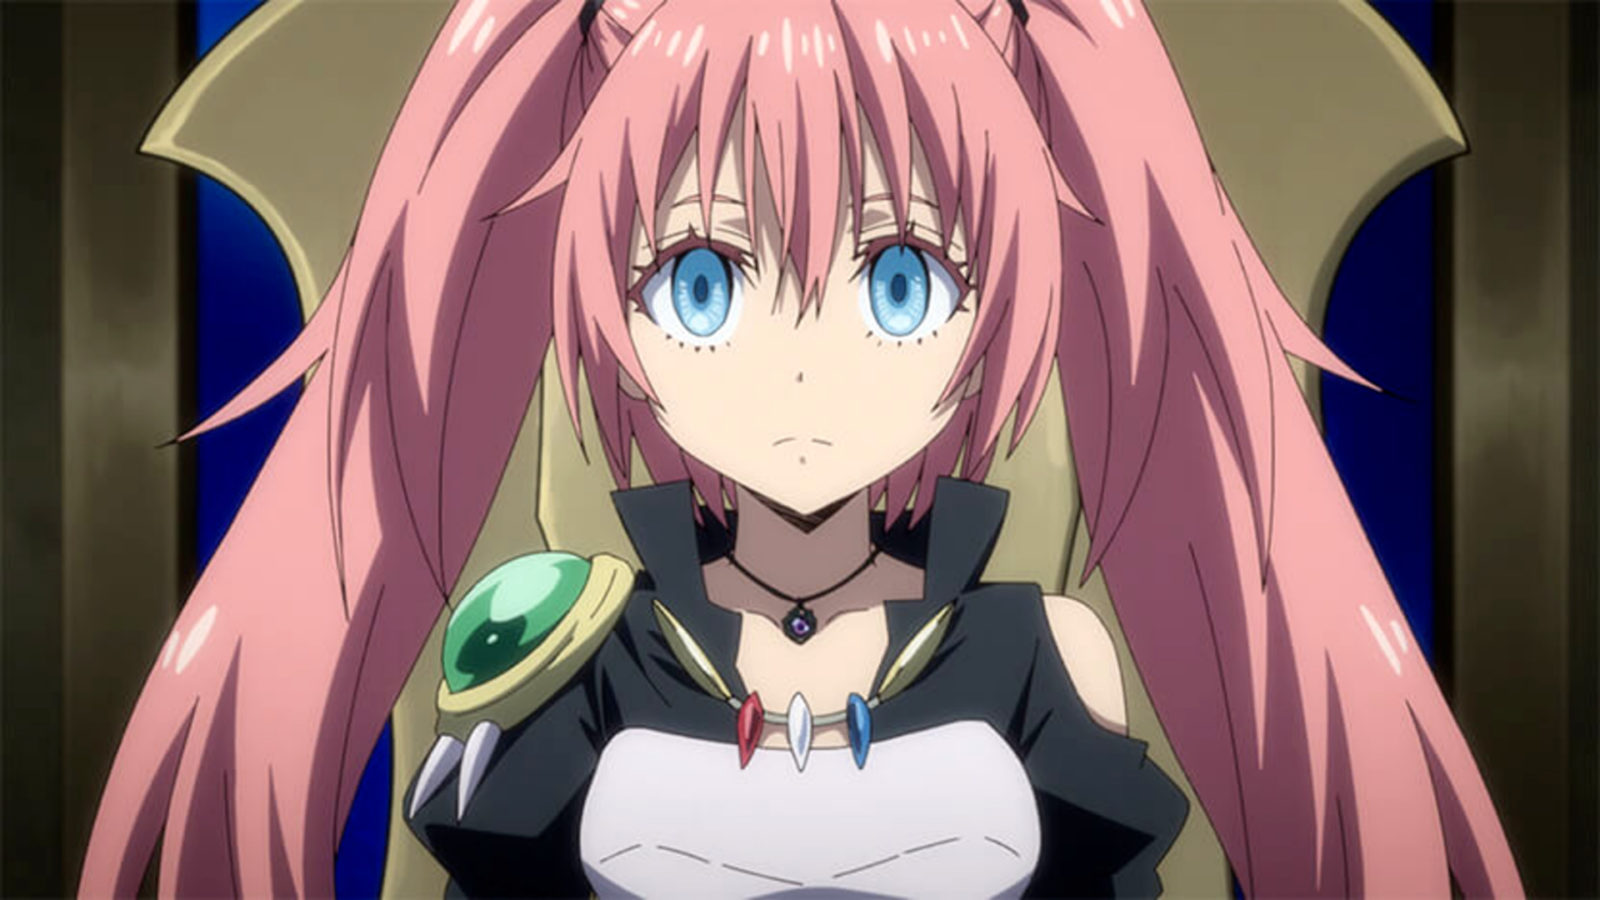 That Time I Got Reincarnated As A Slime Season 2 Episode 23 Spoilers, Release Date and Time